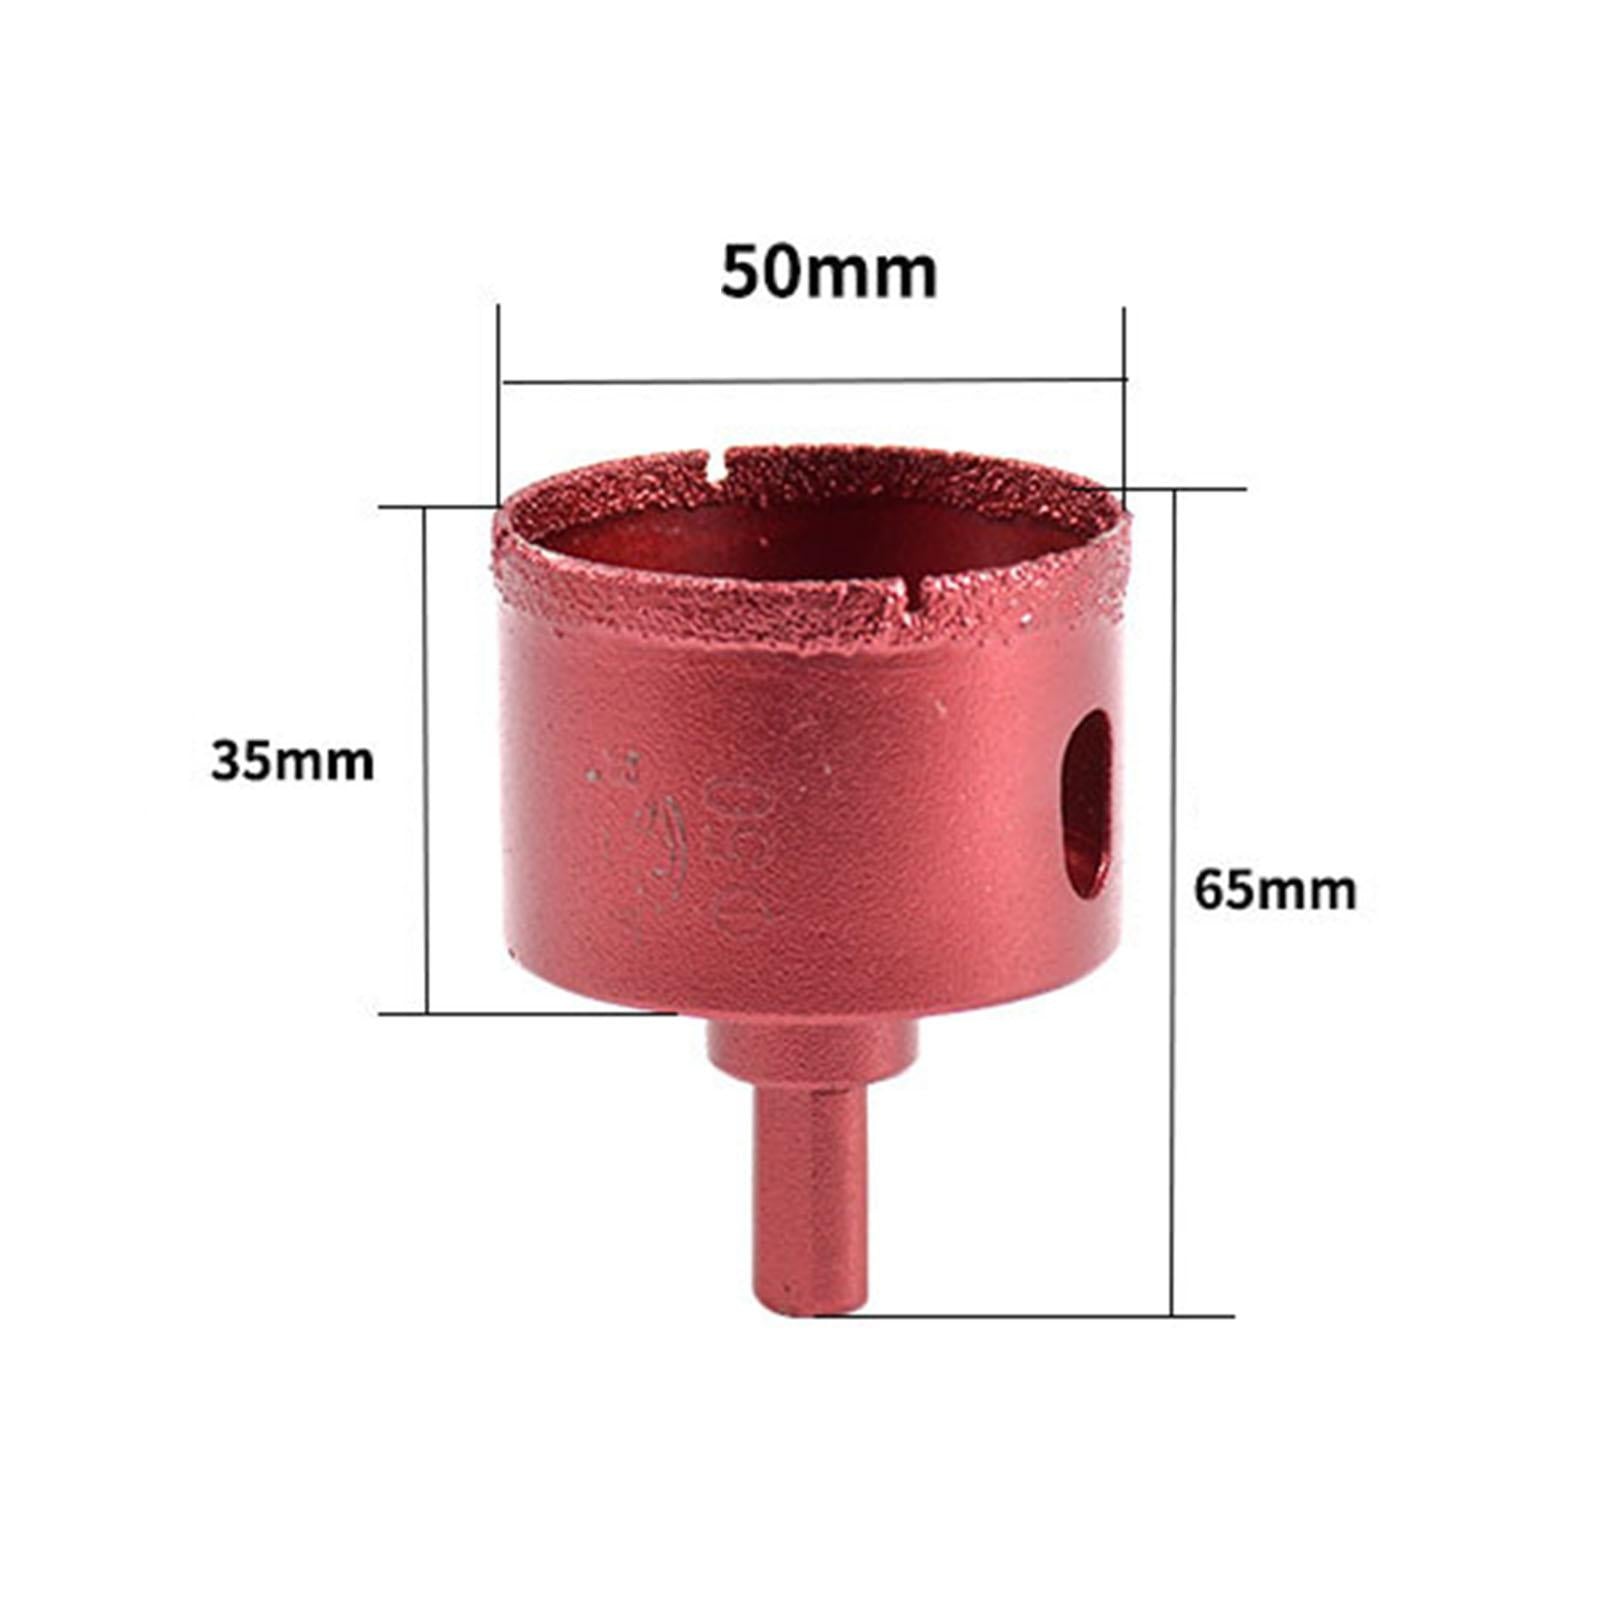 Diamond Hole Saw Drill Bit Tool Cutter for Tile Glass Marble Ceramic 6-50mm